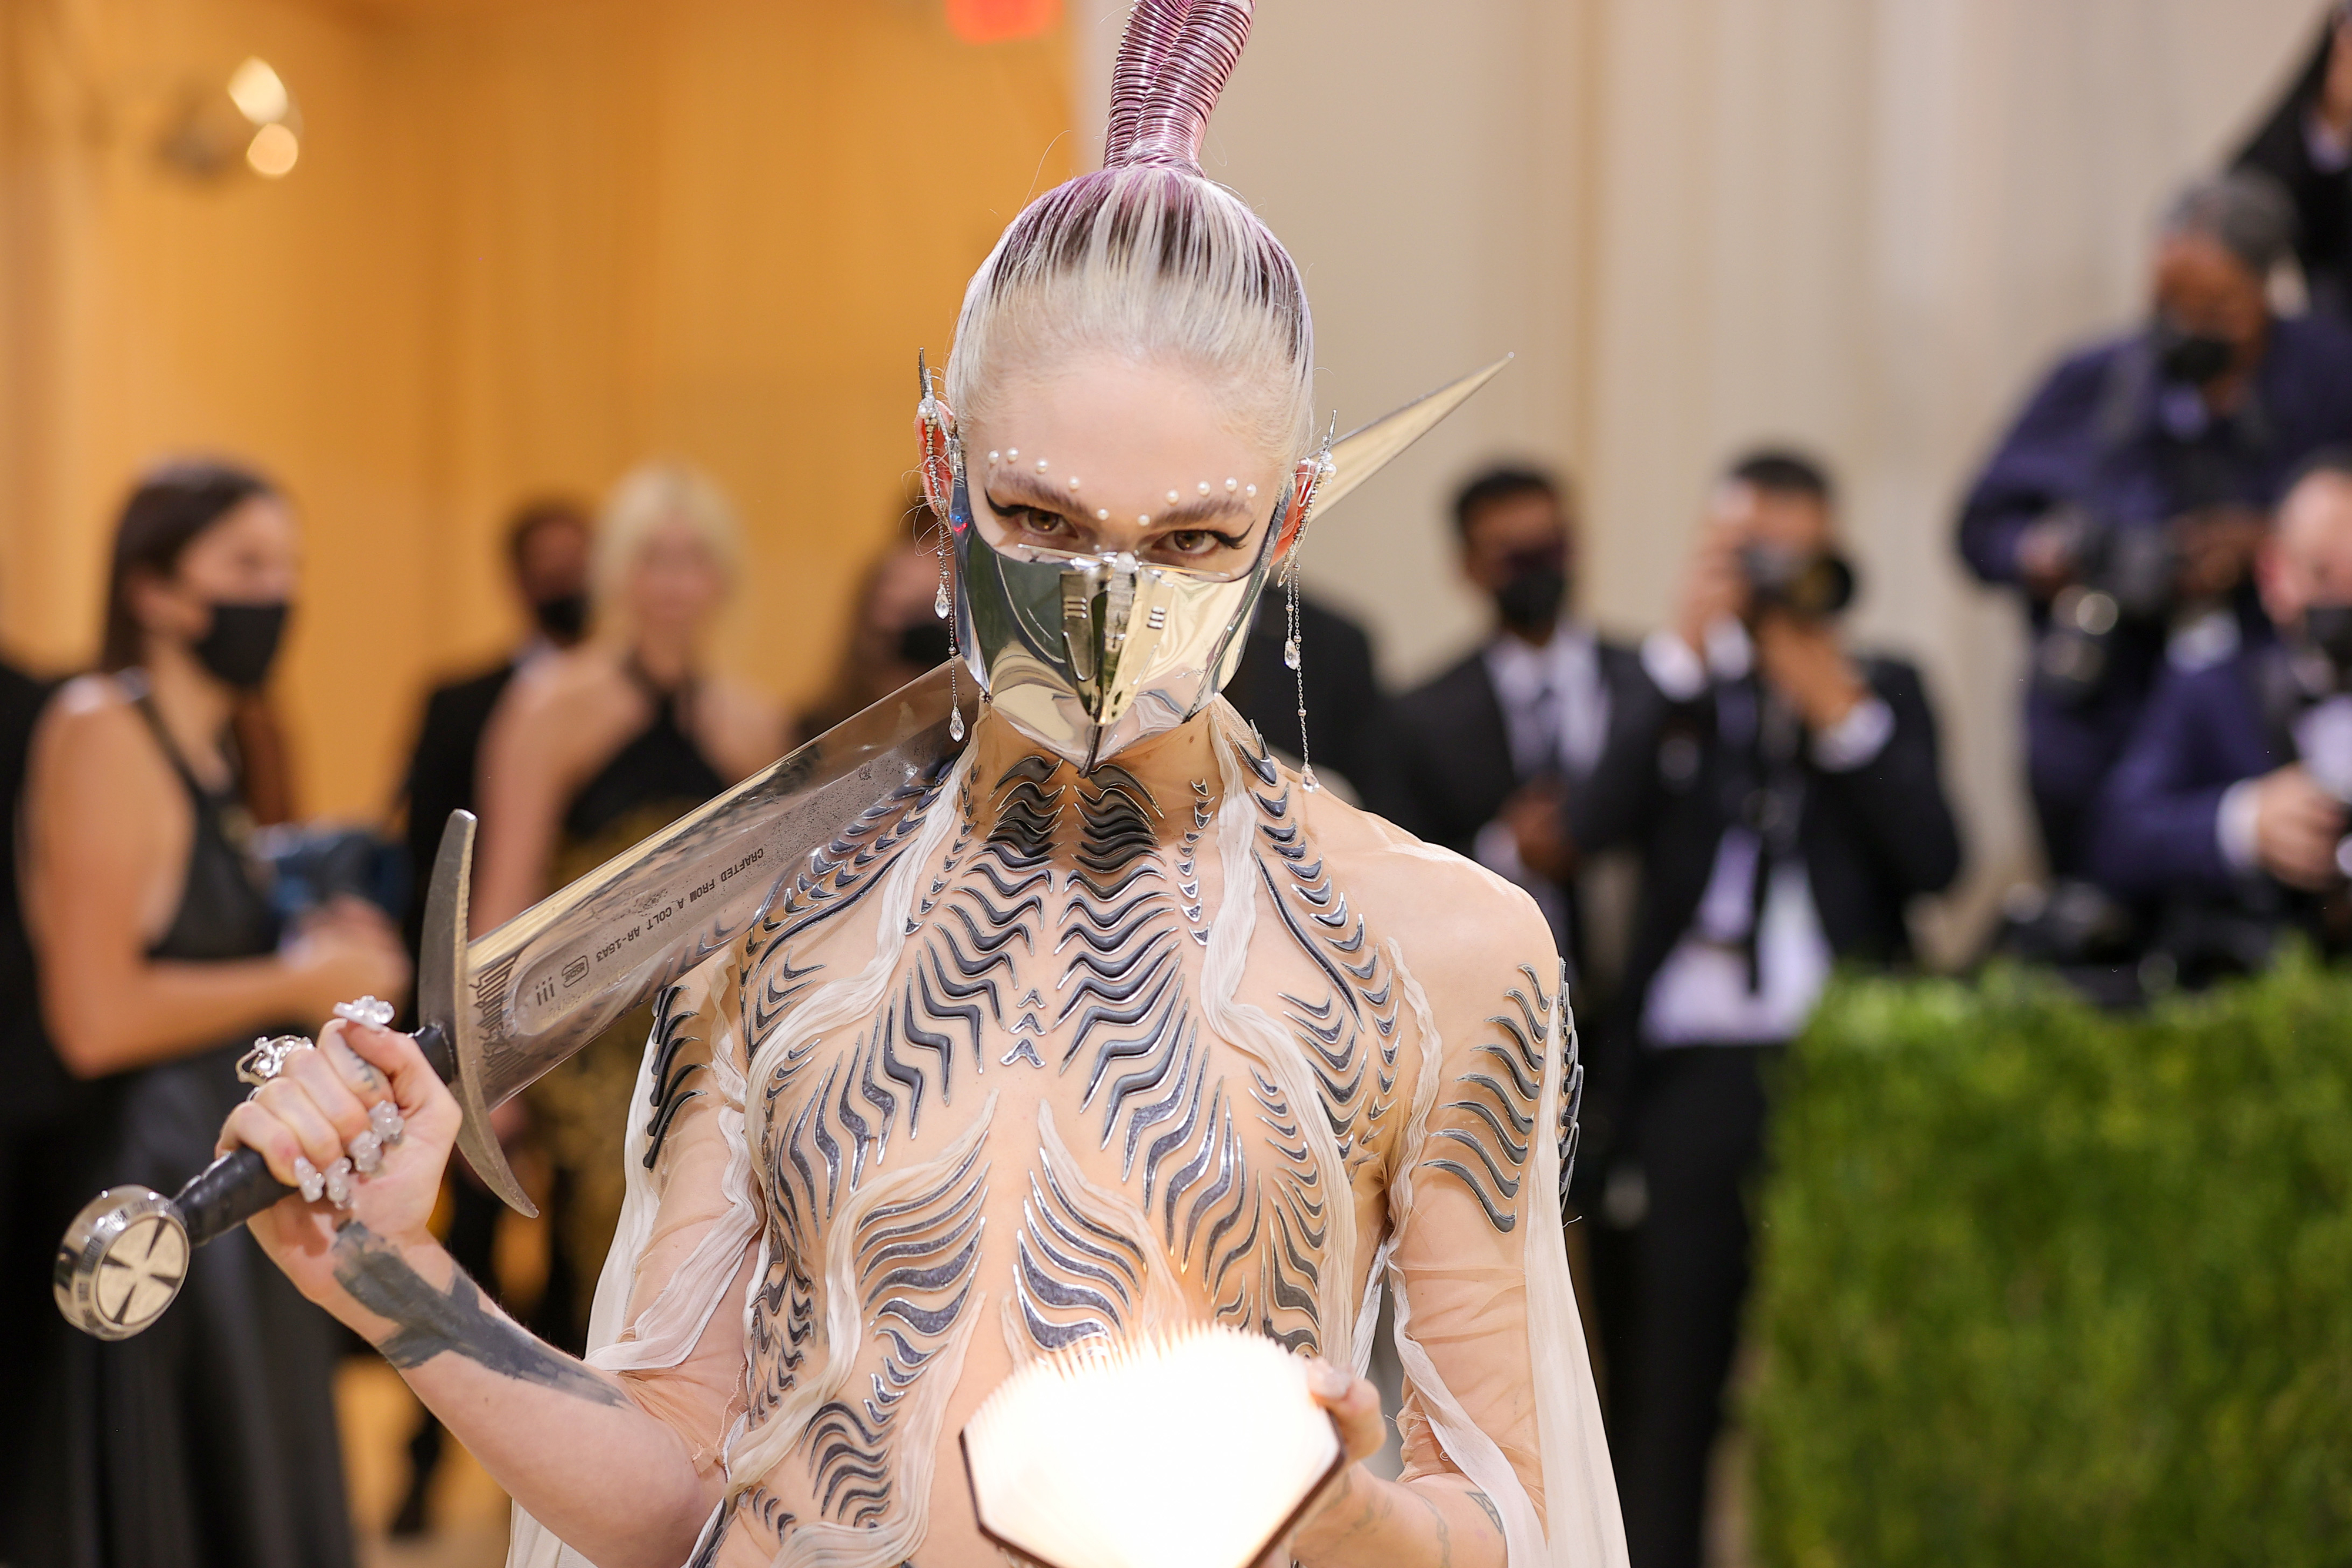 Grimes at a red carpet event in a ethereal Iras van Herpen dress and a metal face mask. Grimes os also carrying a sword